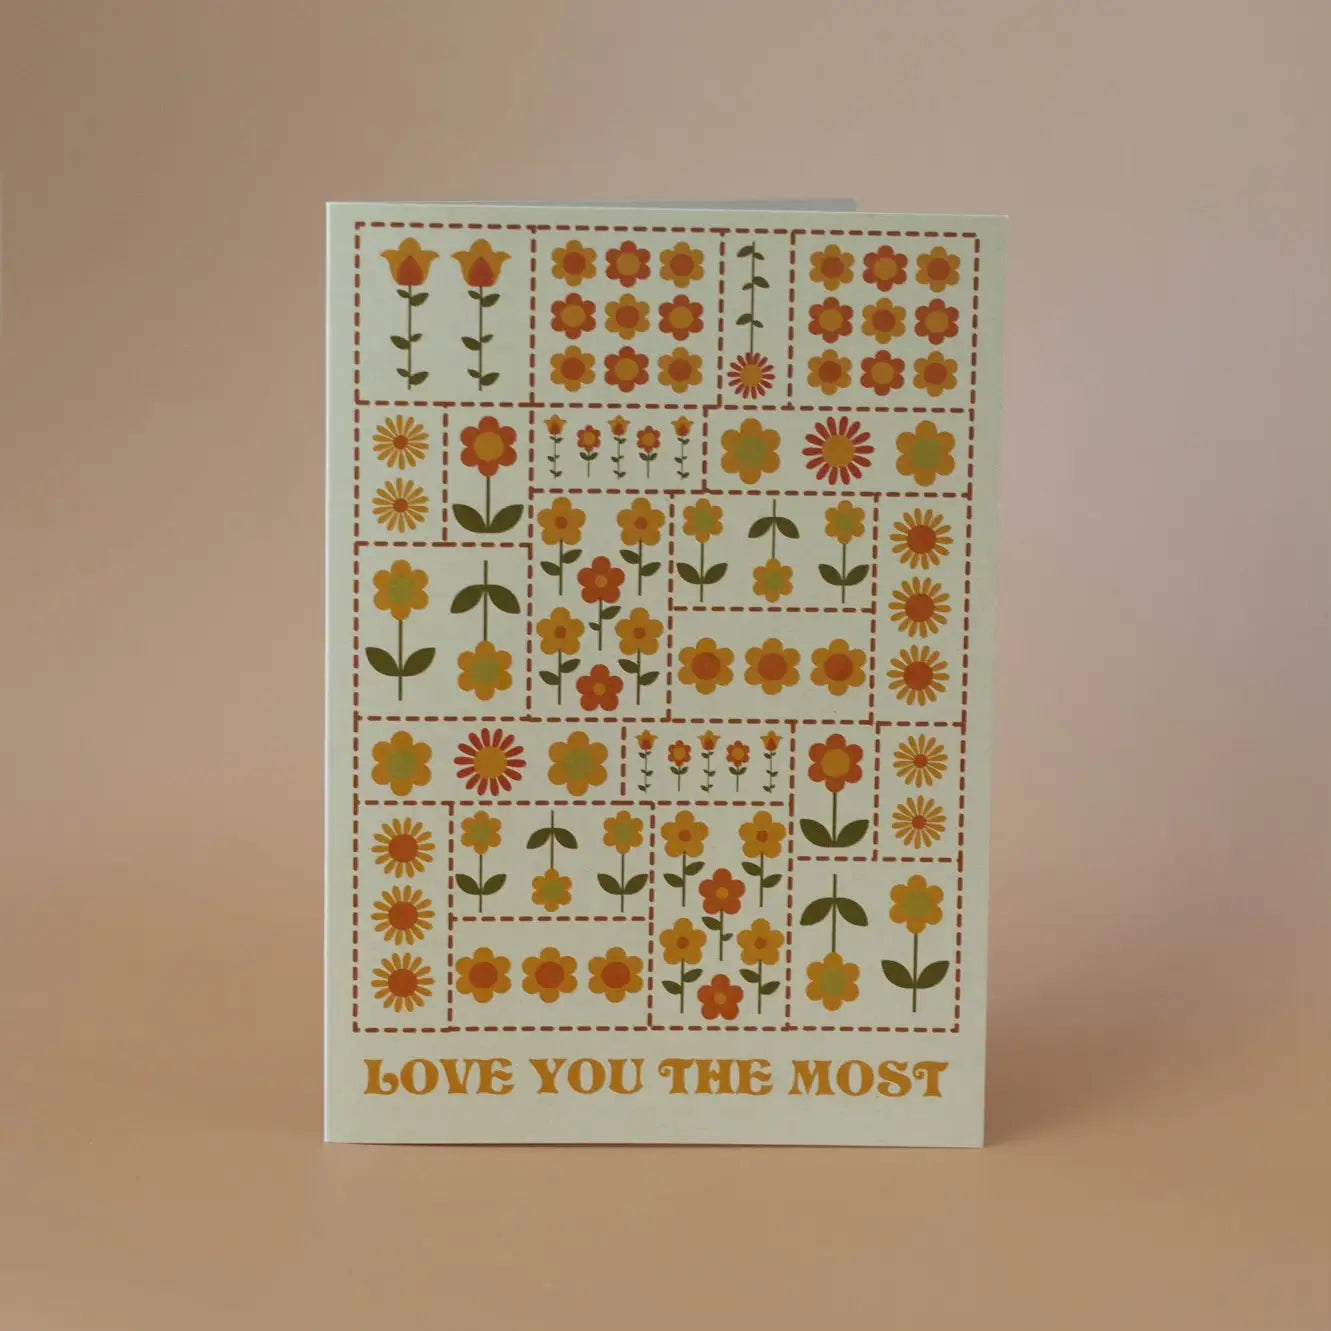 Love You the Most Greeting Card